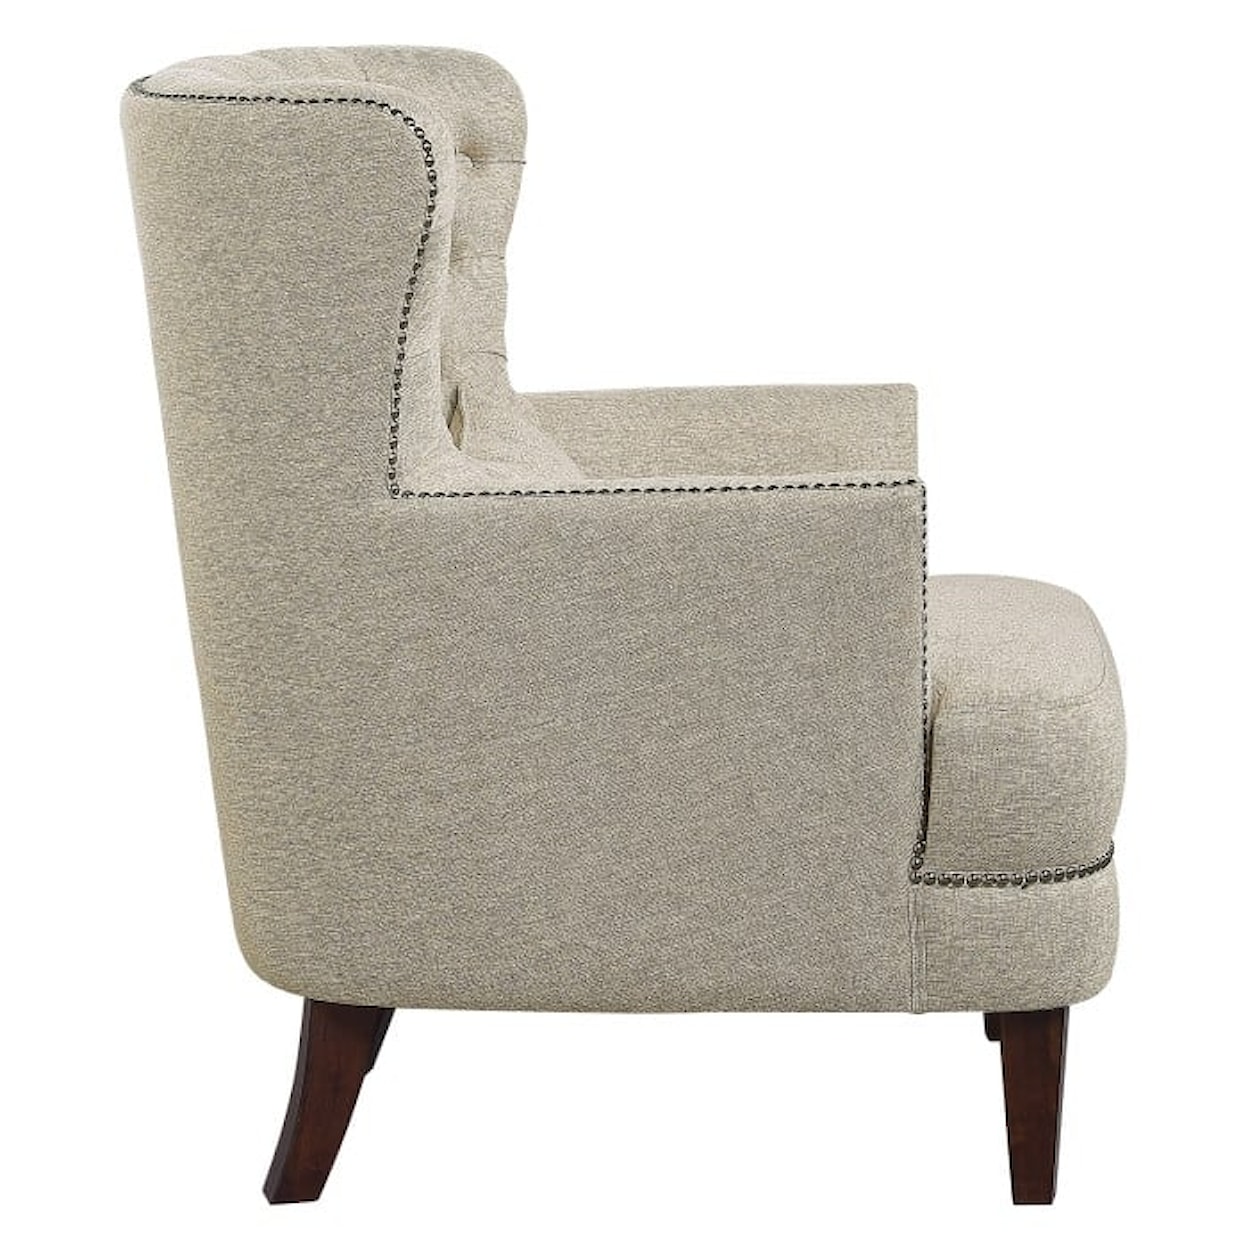 Homelegance Marriana Accent Chair